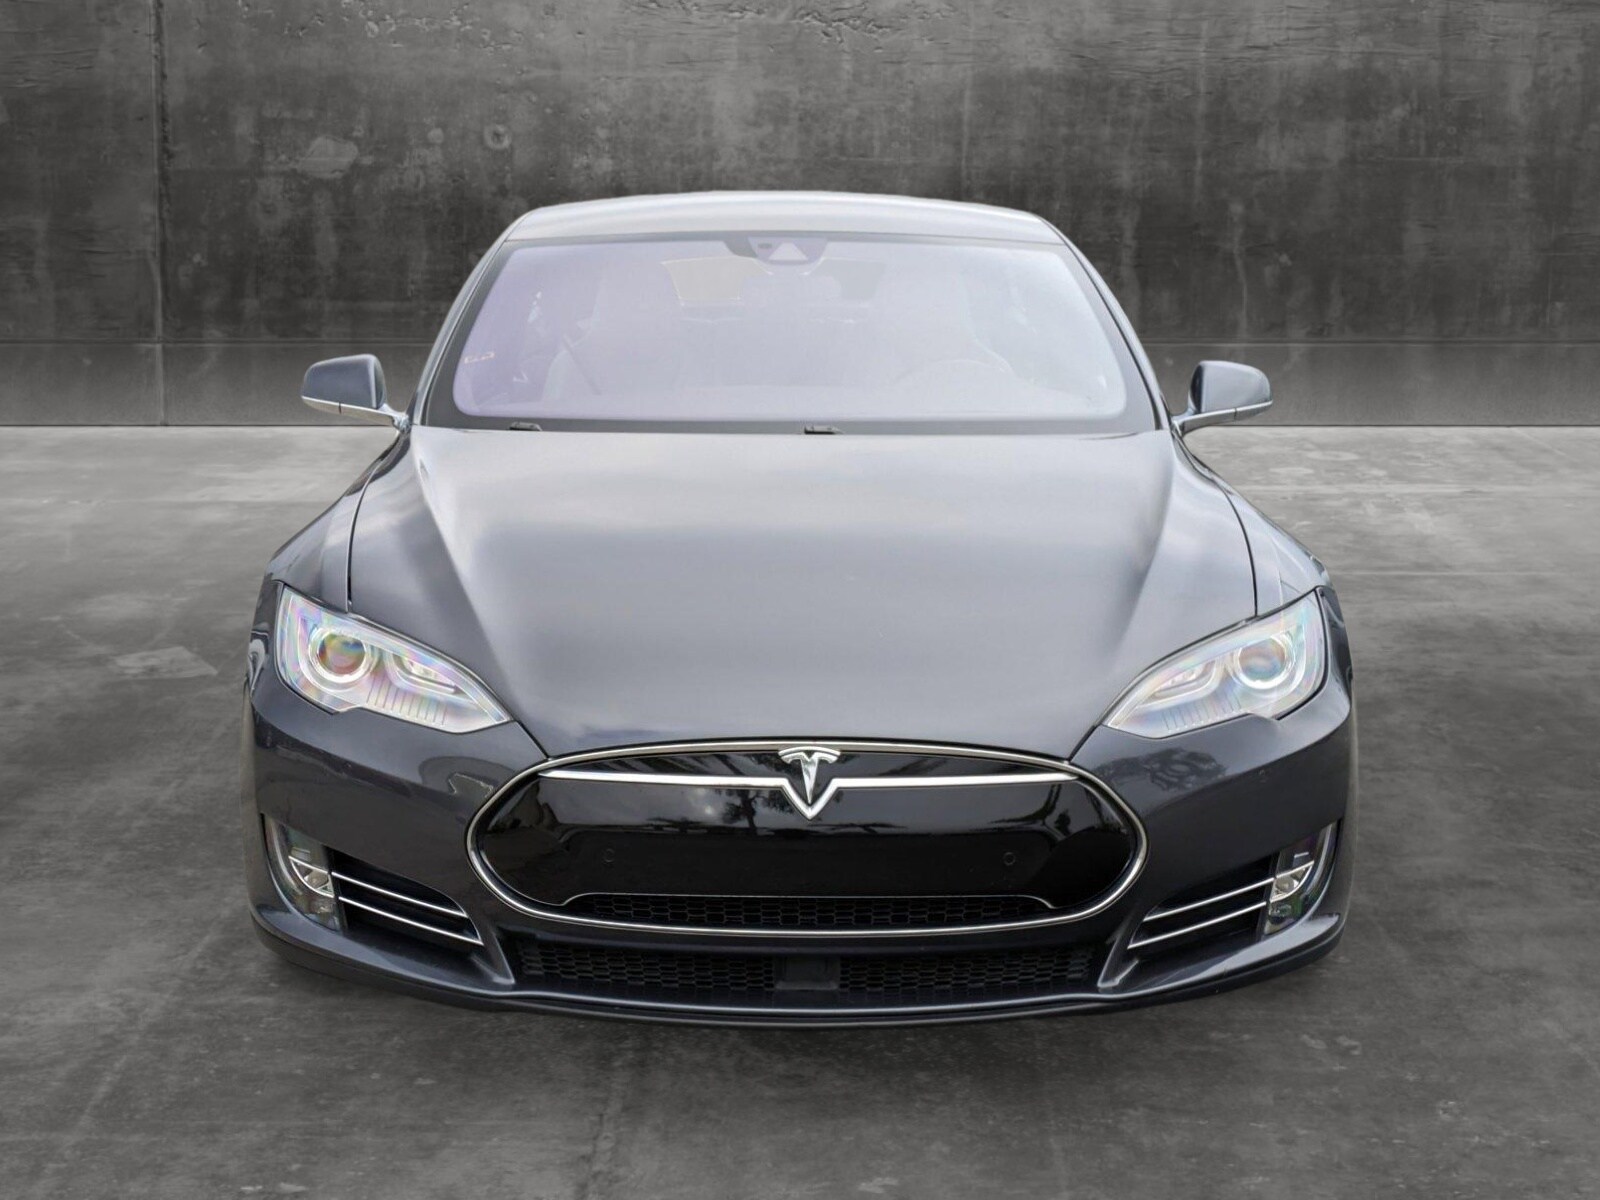 Used 2015 Tesla Model S 85D with VIN 5YJSA1E21FF109857 for sale in Carlsbad, CA